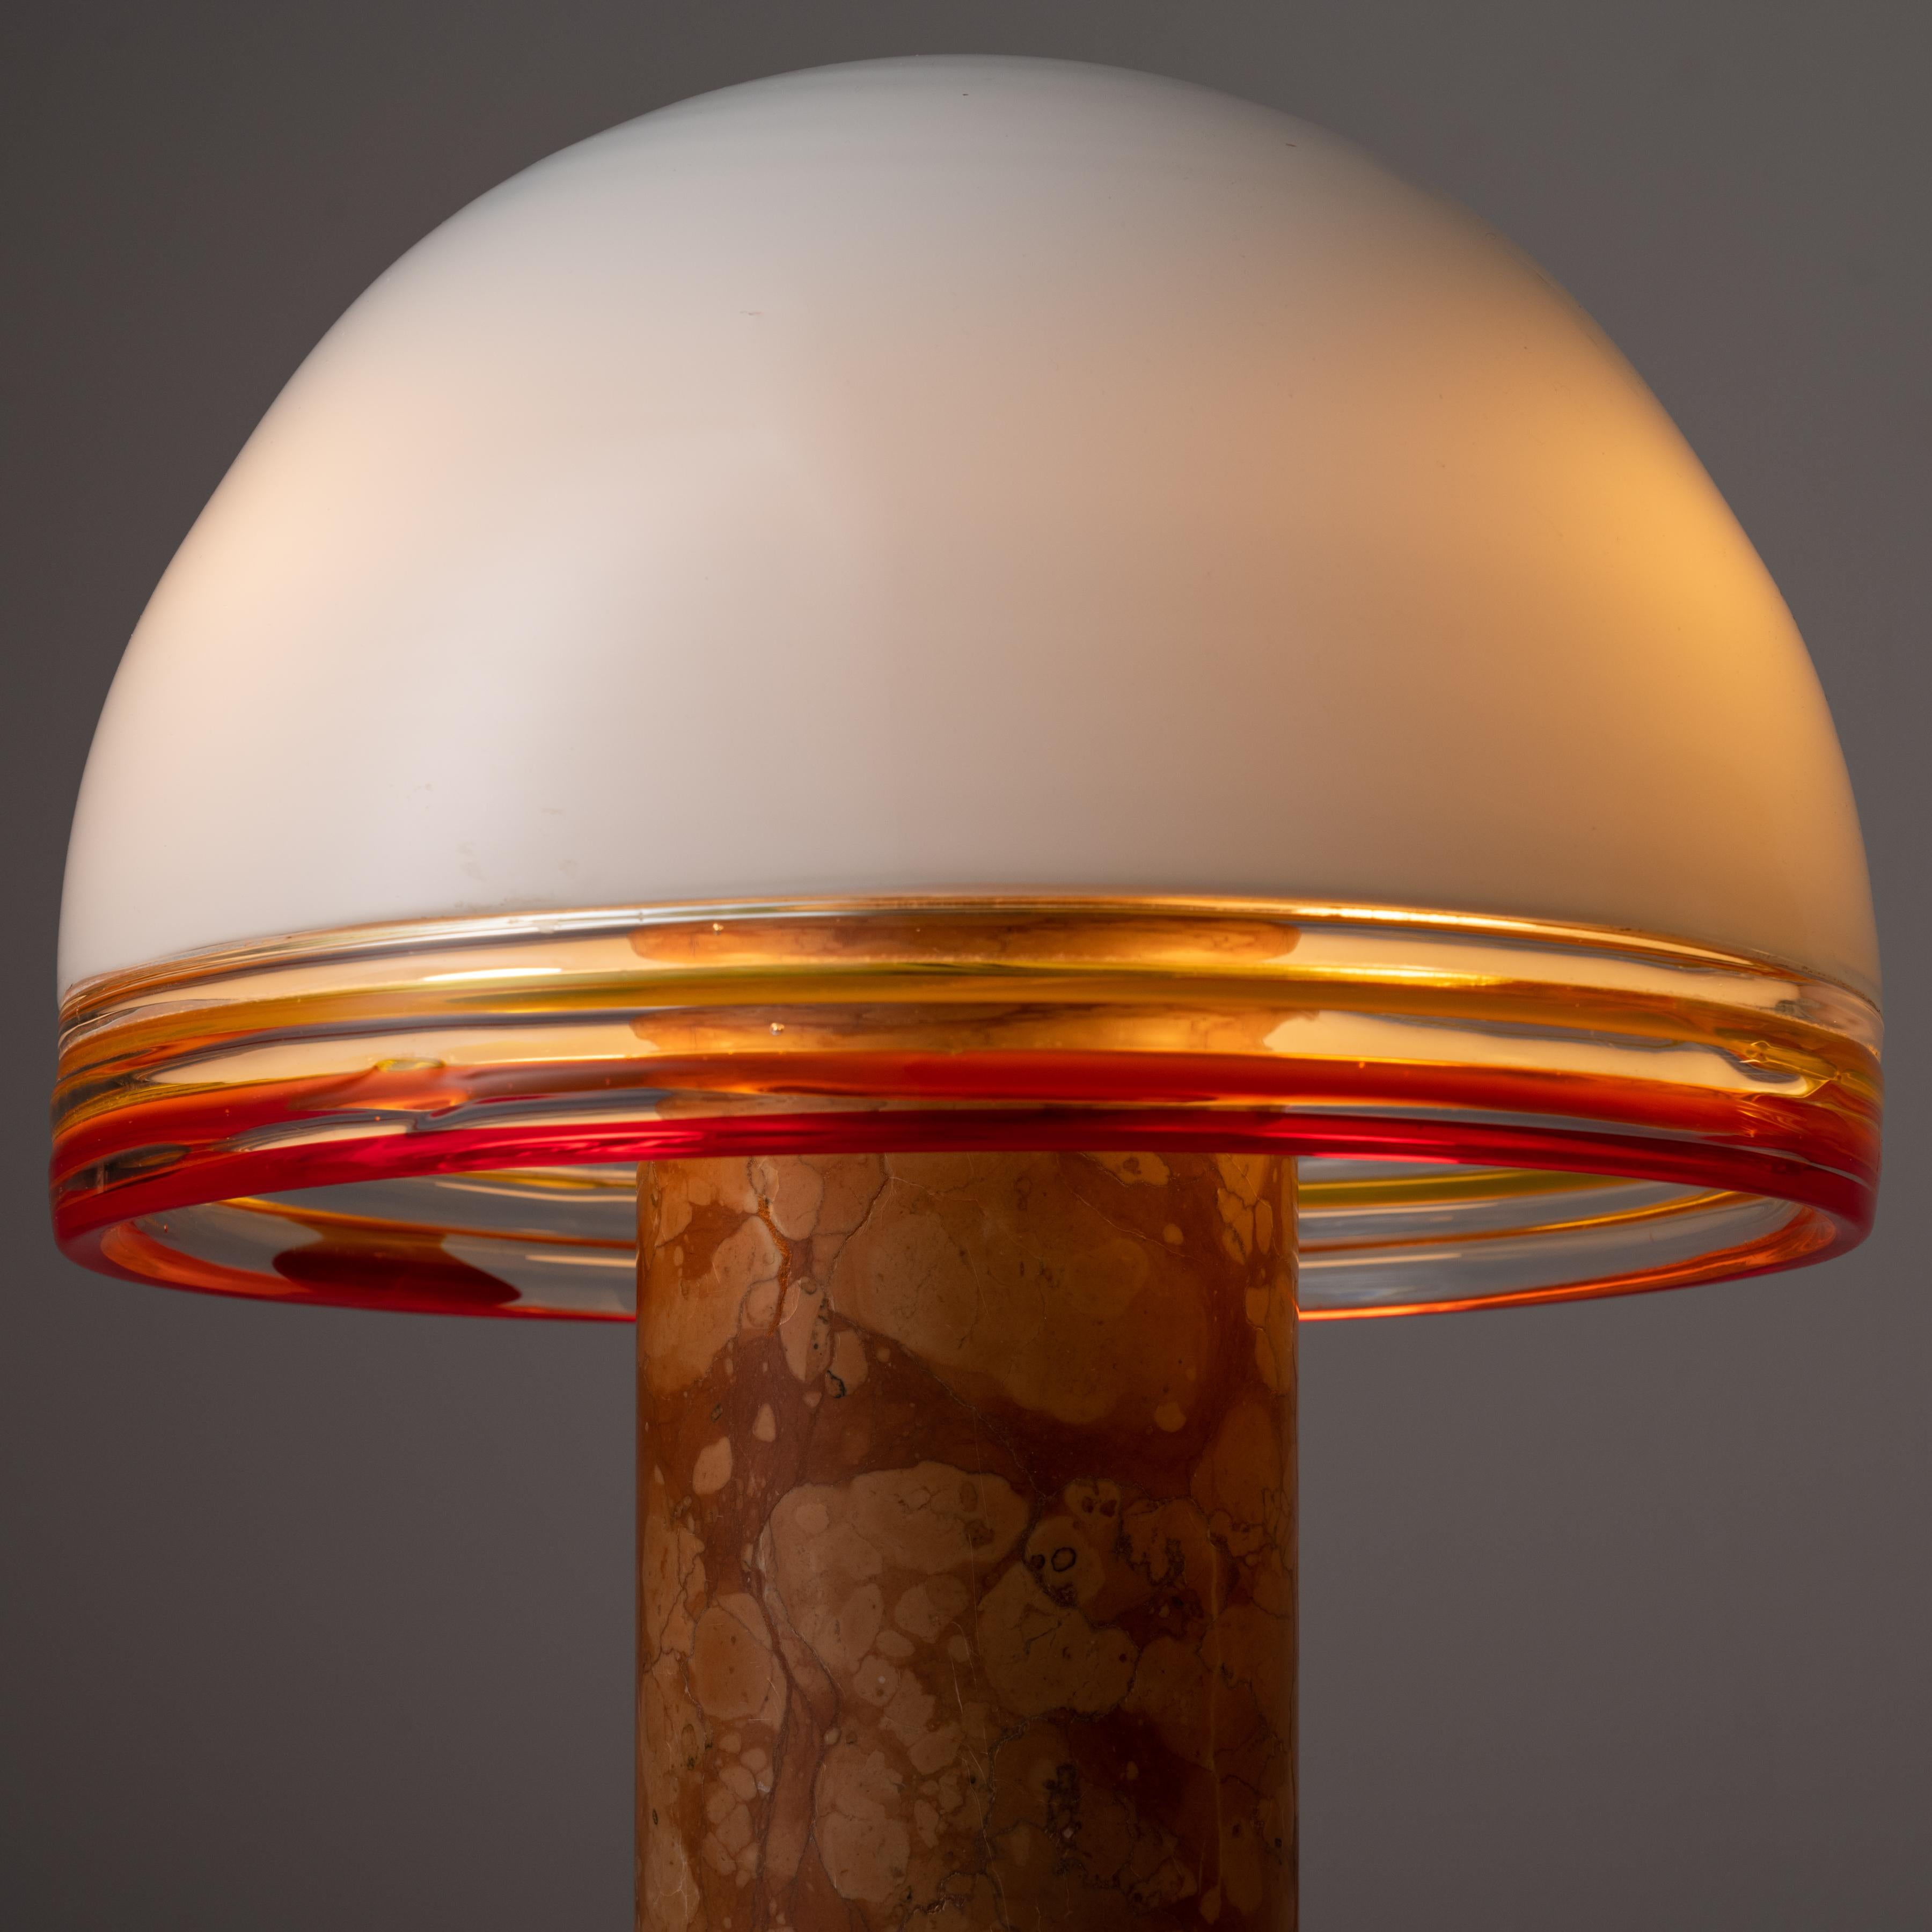 ‘Febo’ Table Lamps by Roberto Pamio and Toso for Leucos. Designed and manufactured in Italy, circa 1970. Playful and timeless table lamps with smooth marbled base and custom milk glass shades featuring red and yellow ridged detailing at the lip of